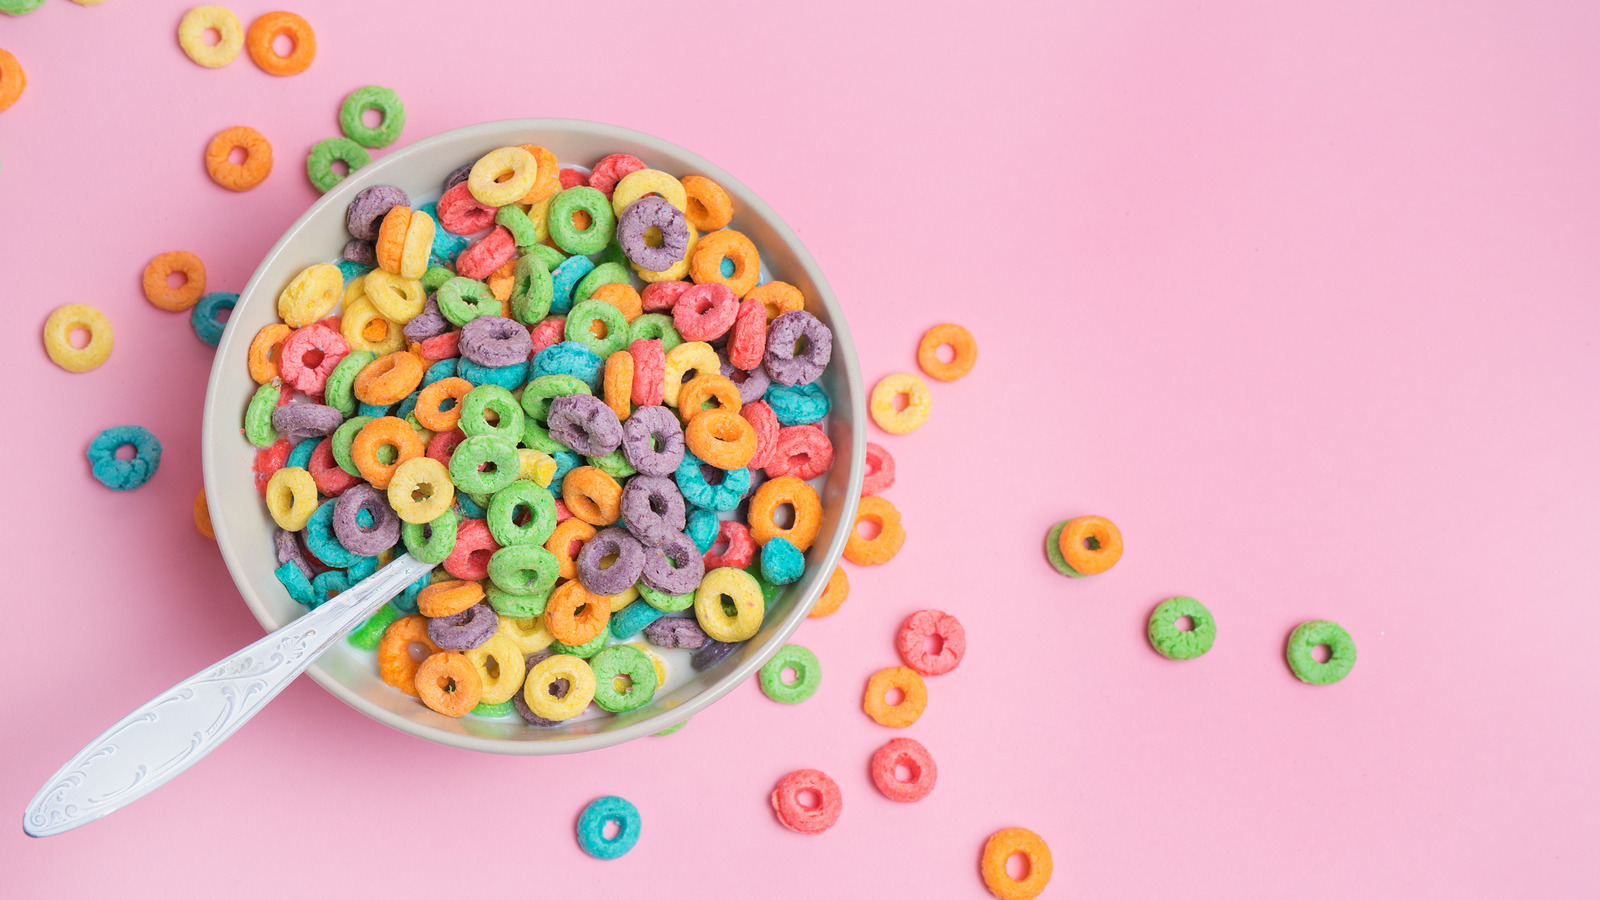 Whatever Happened To Froot Loops Cereal Straws?